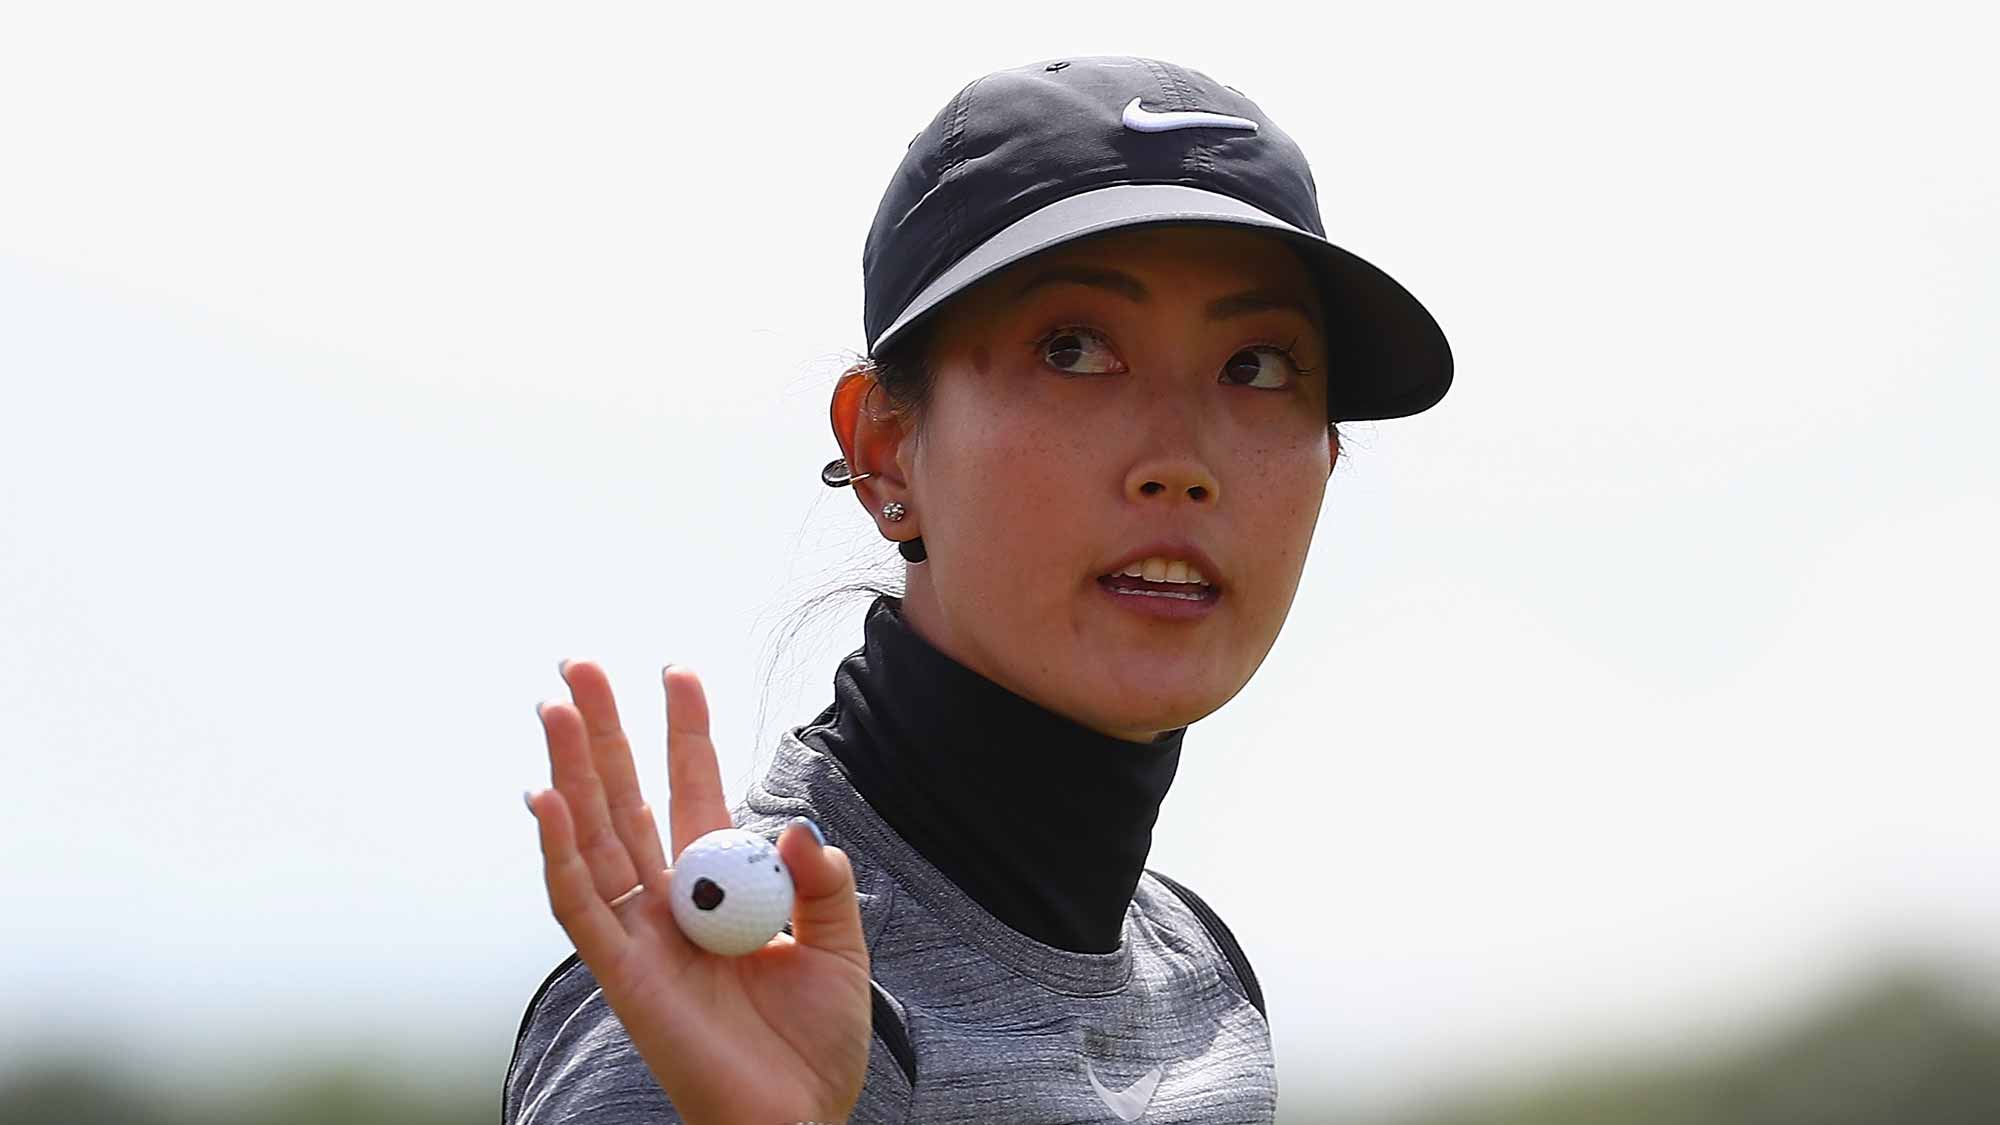 Michelle Wie of the United States celebrates her putt on the 18th green during the first round of the Ricoh Women's British Open at Kingsbarns Golf Links 